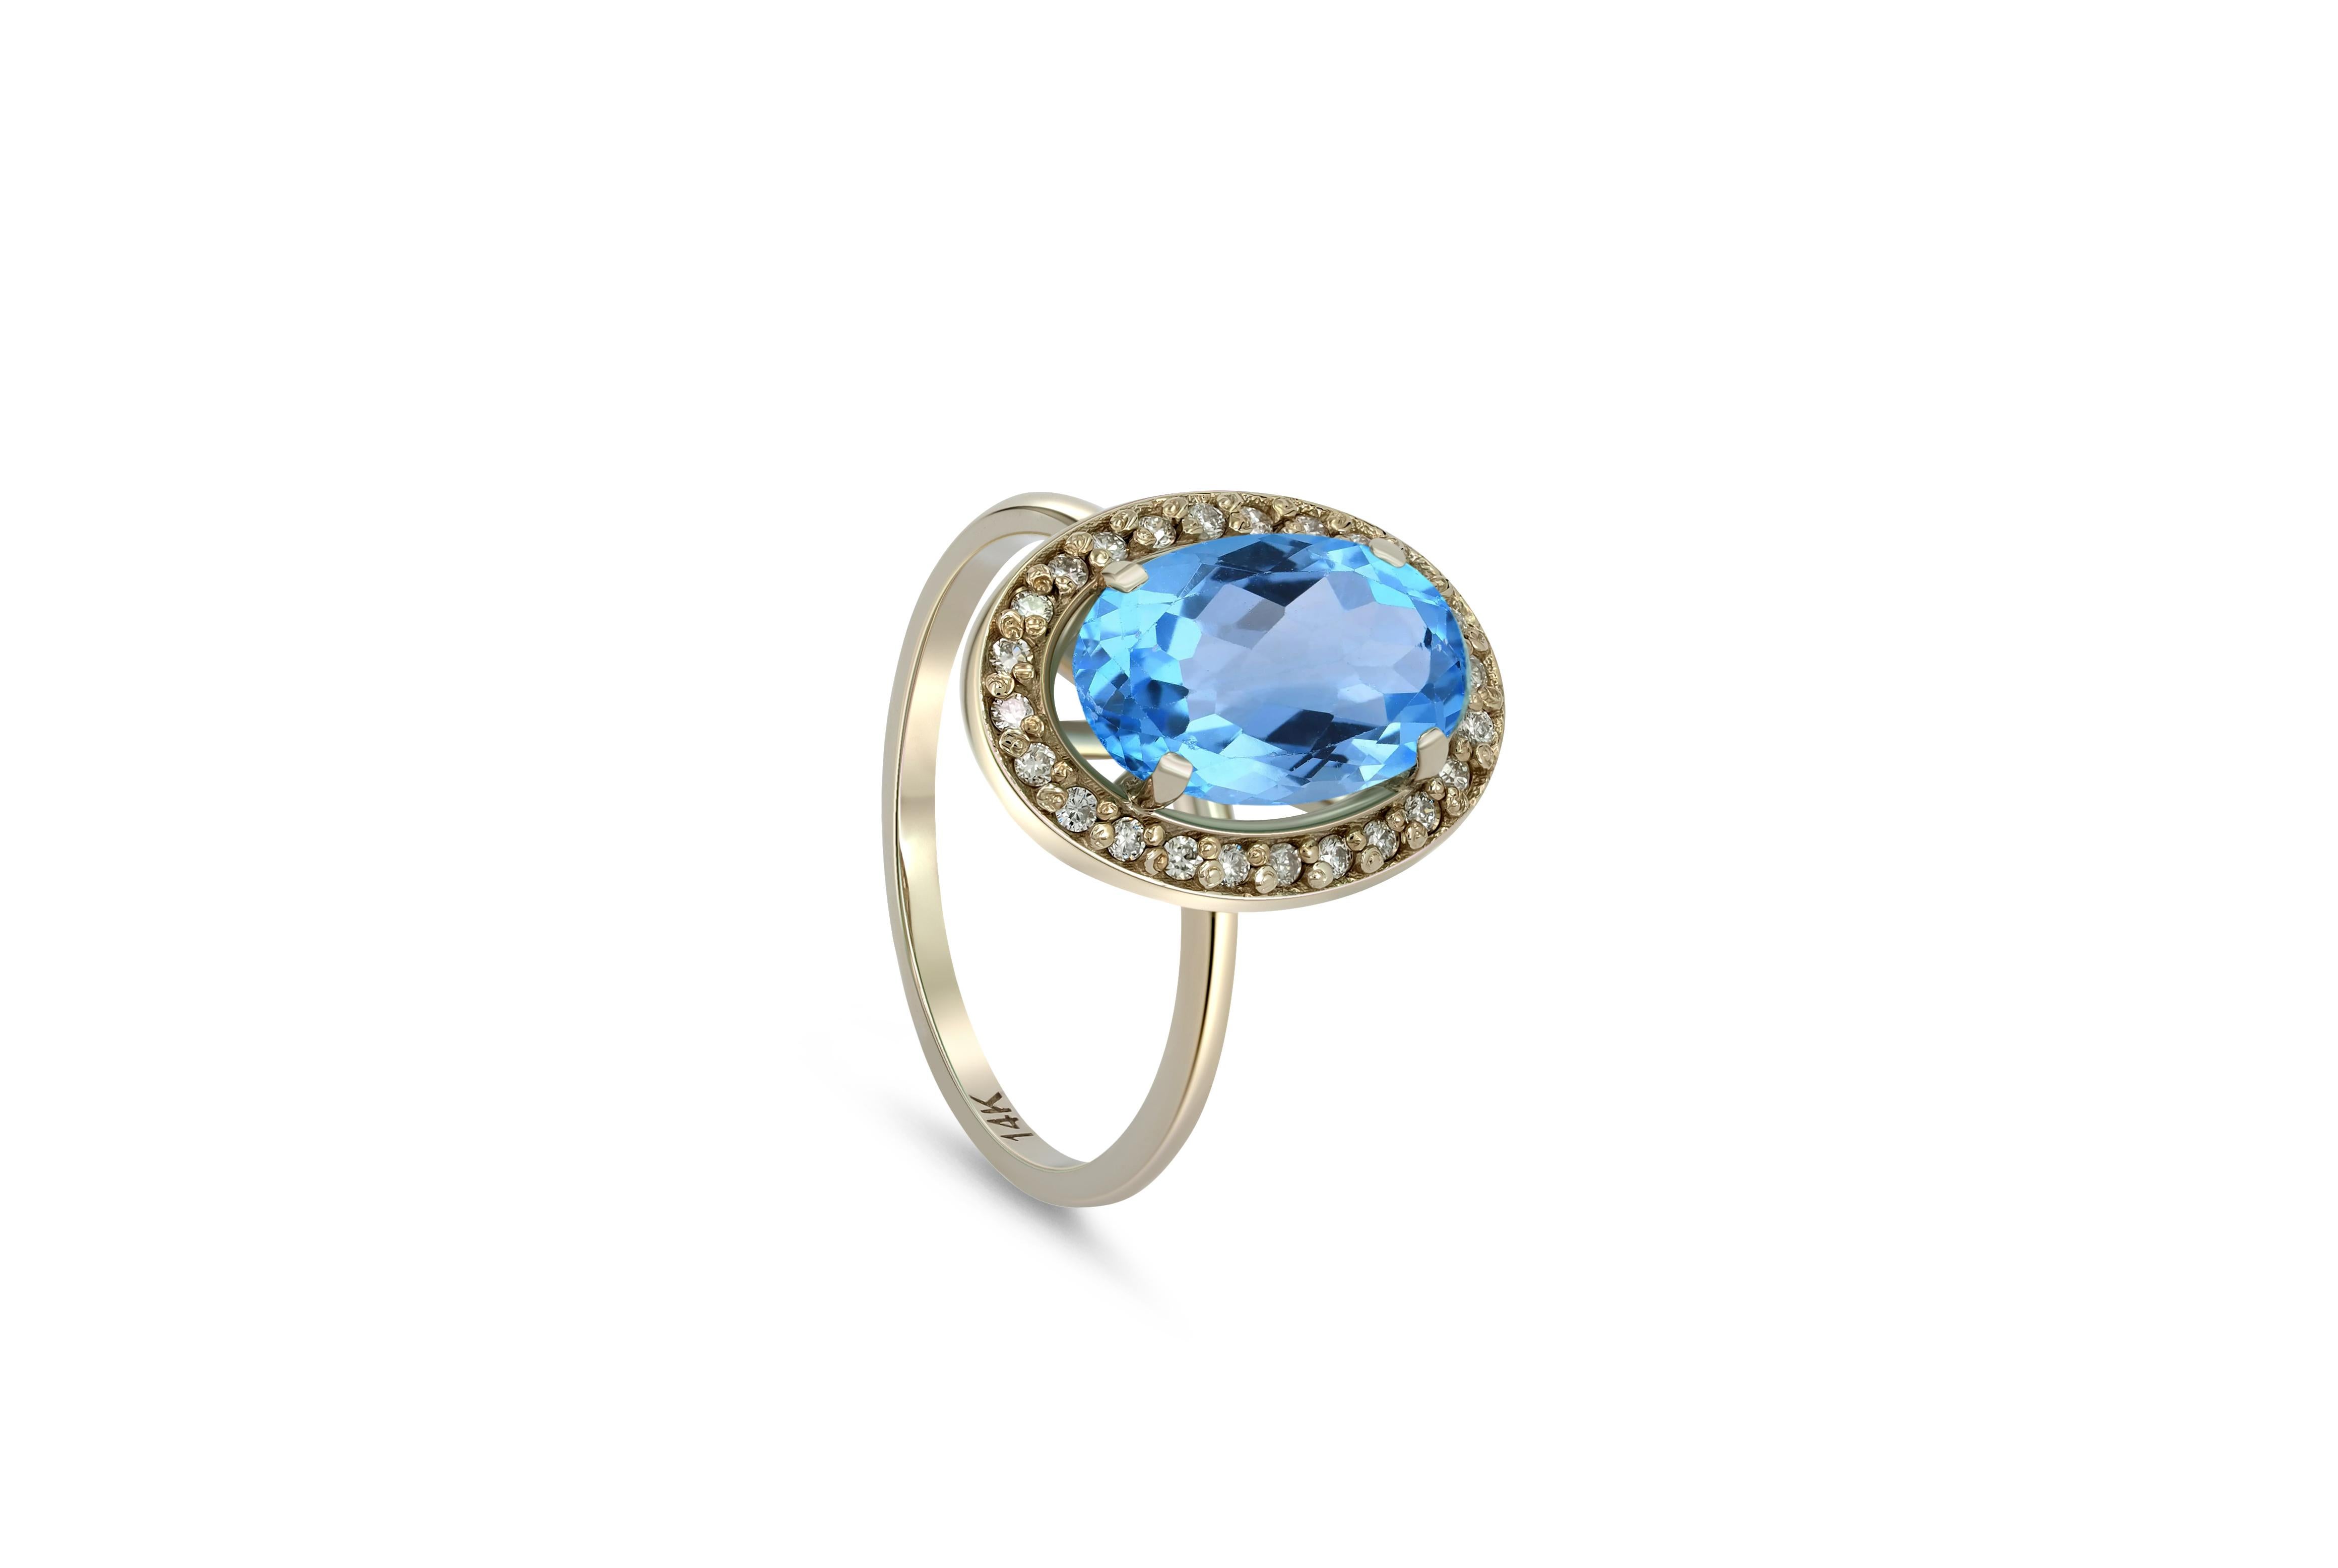 Topaz and diamonds 14k gold ring. 
Oval Topaz gold ring. Topaz diamond halo ring. Blue gemstone ring.

Metal: 14k gold
Weight: 3 gr depends from size

Gemstones:
Topaz - 1 piece
Cut - oval
Color - blue
Weight - 3-3.2 ct

Side gemstones -